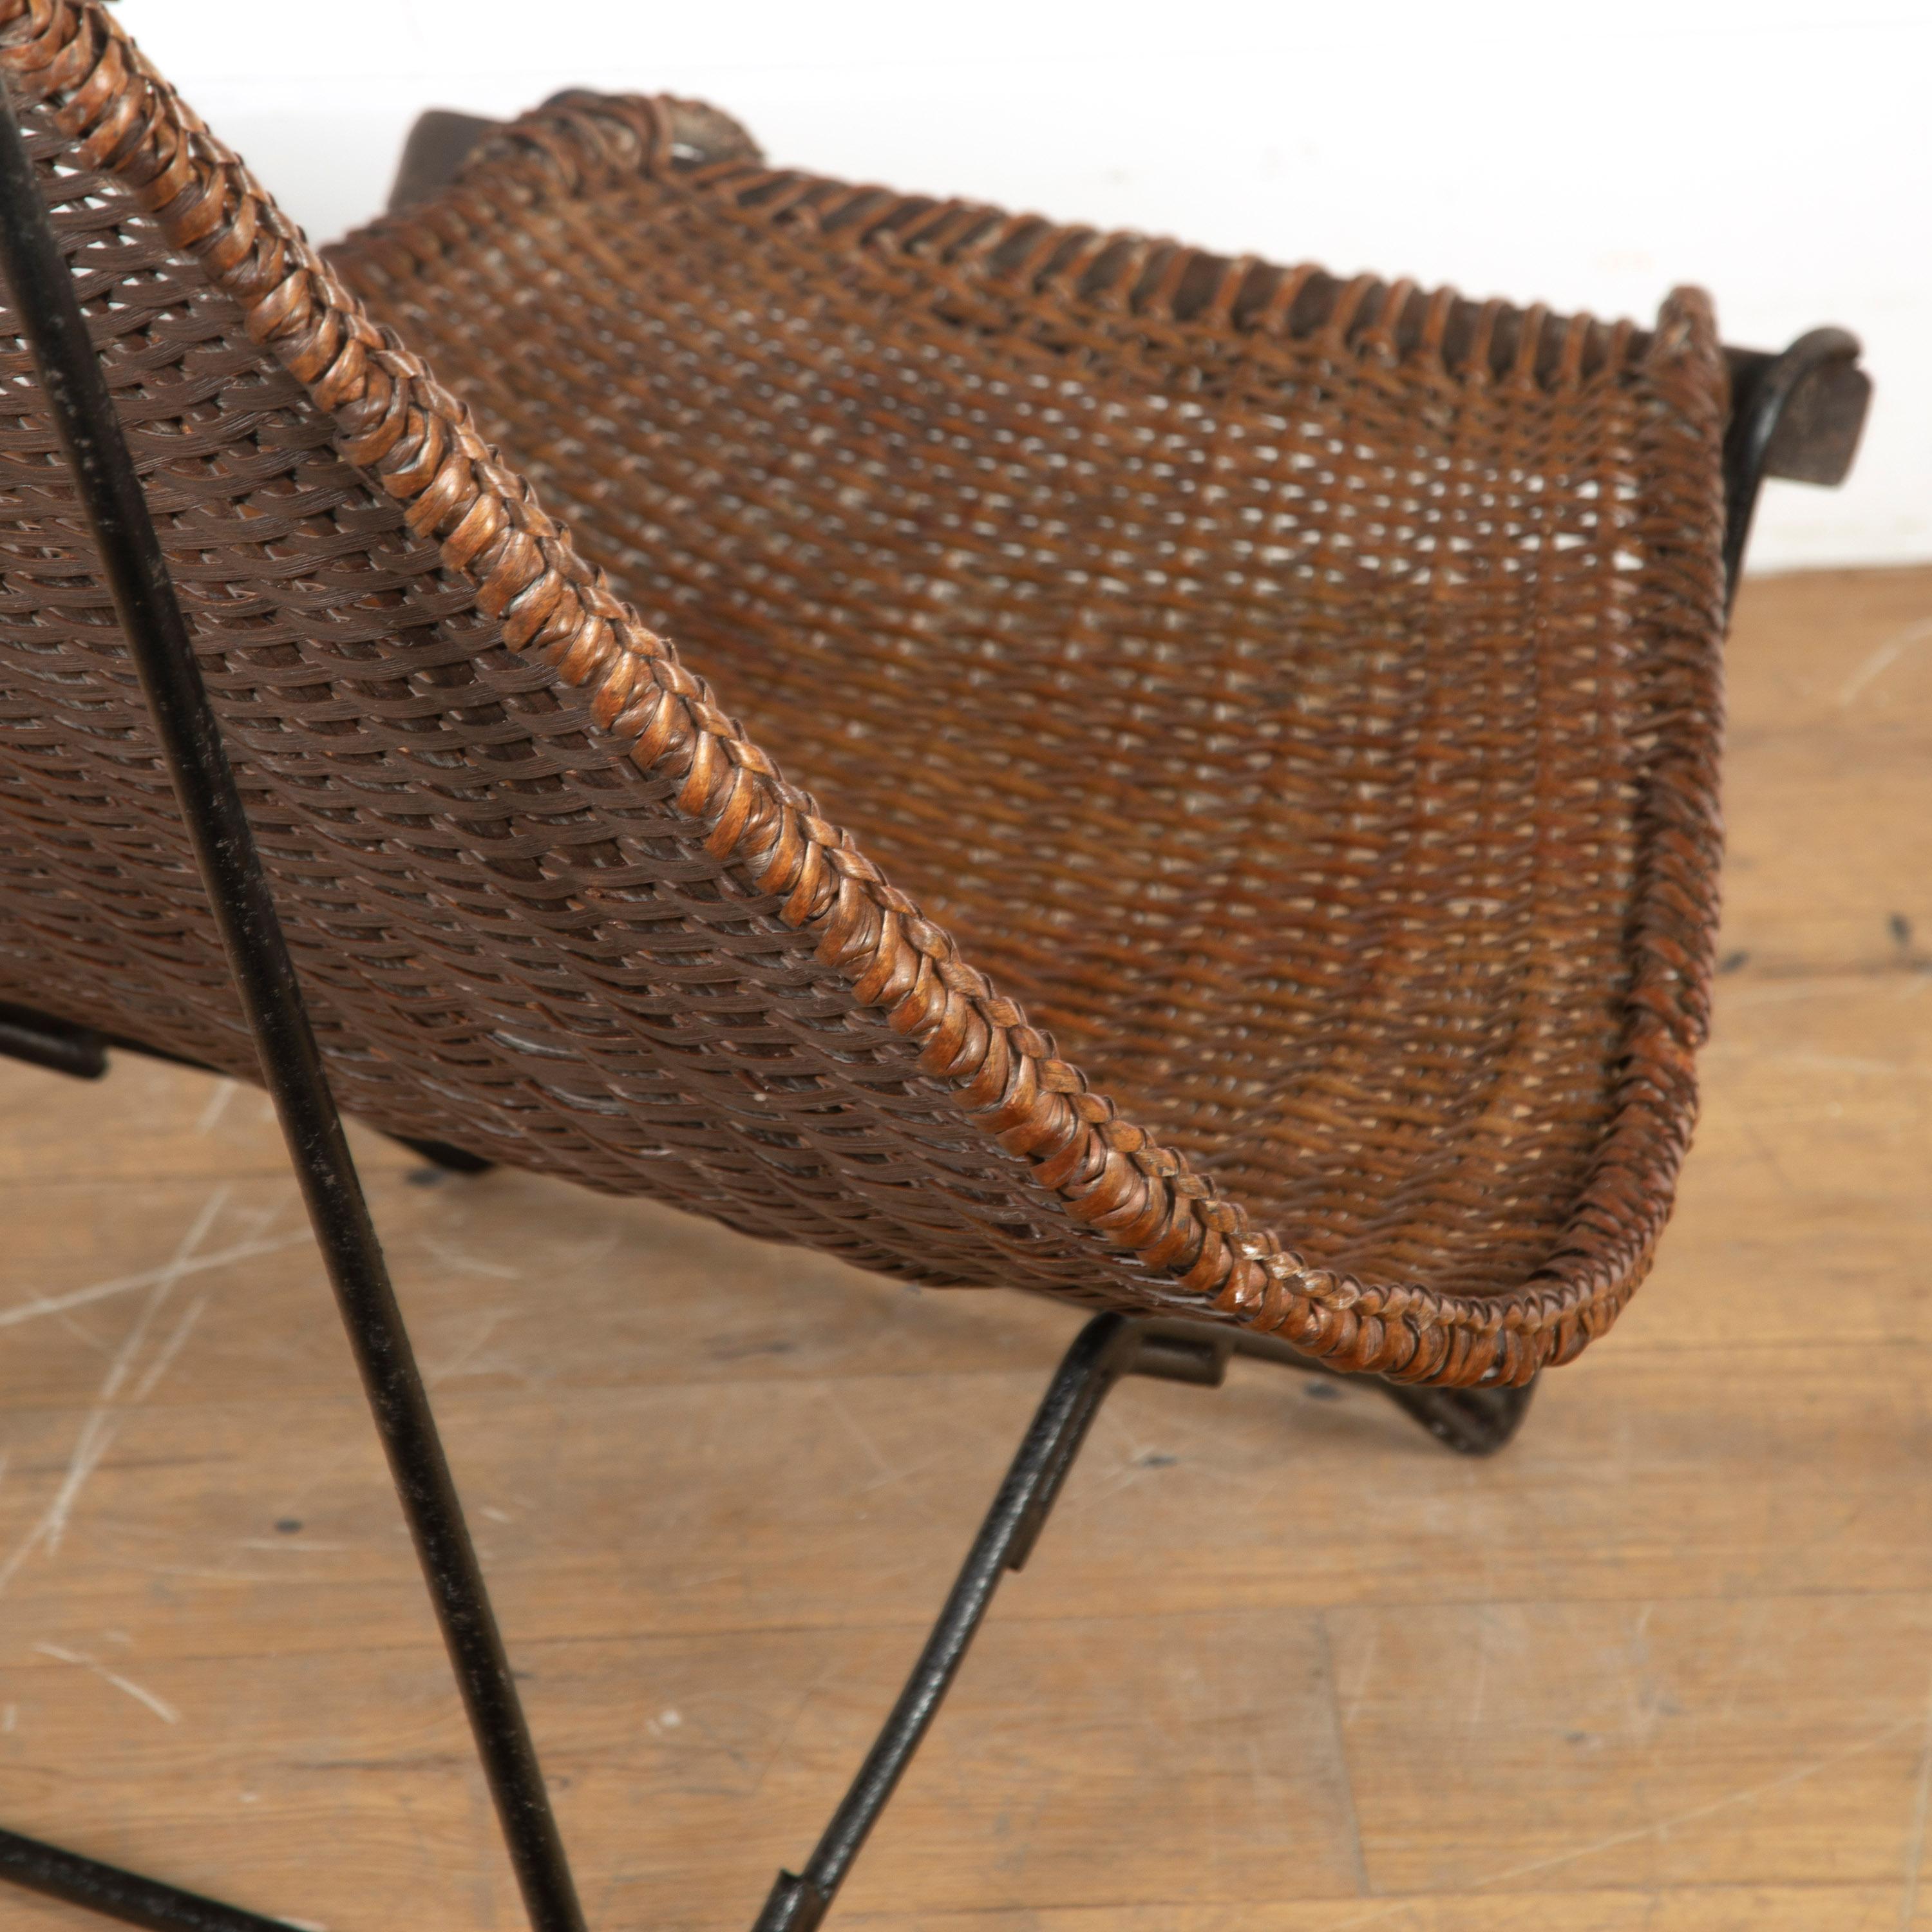 Stylish rattan lounge chair.

Of American origin and dating from the mid-20th century, this Californian 1960’s Duyan lounge chair is by John Risley.

It is in great condition for its age and shall continue to improve in comfortability with wear.